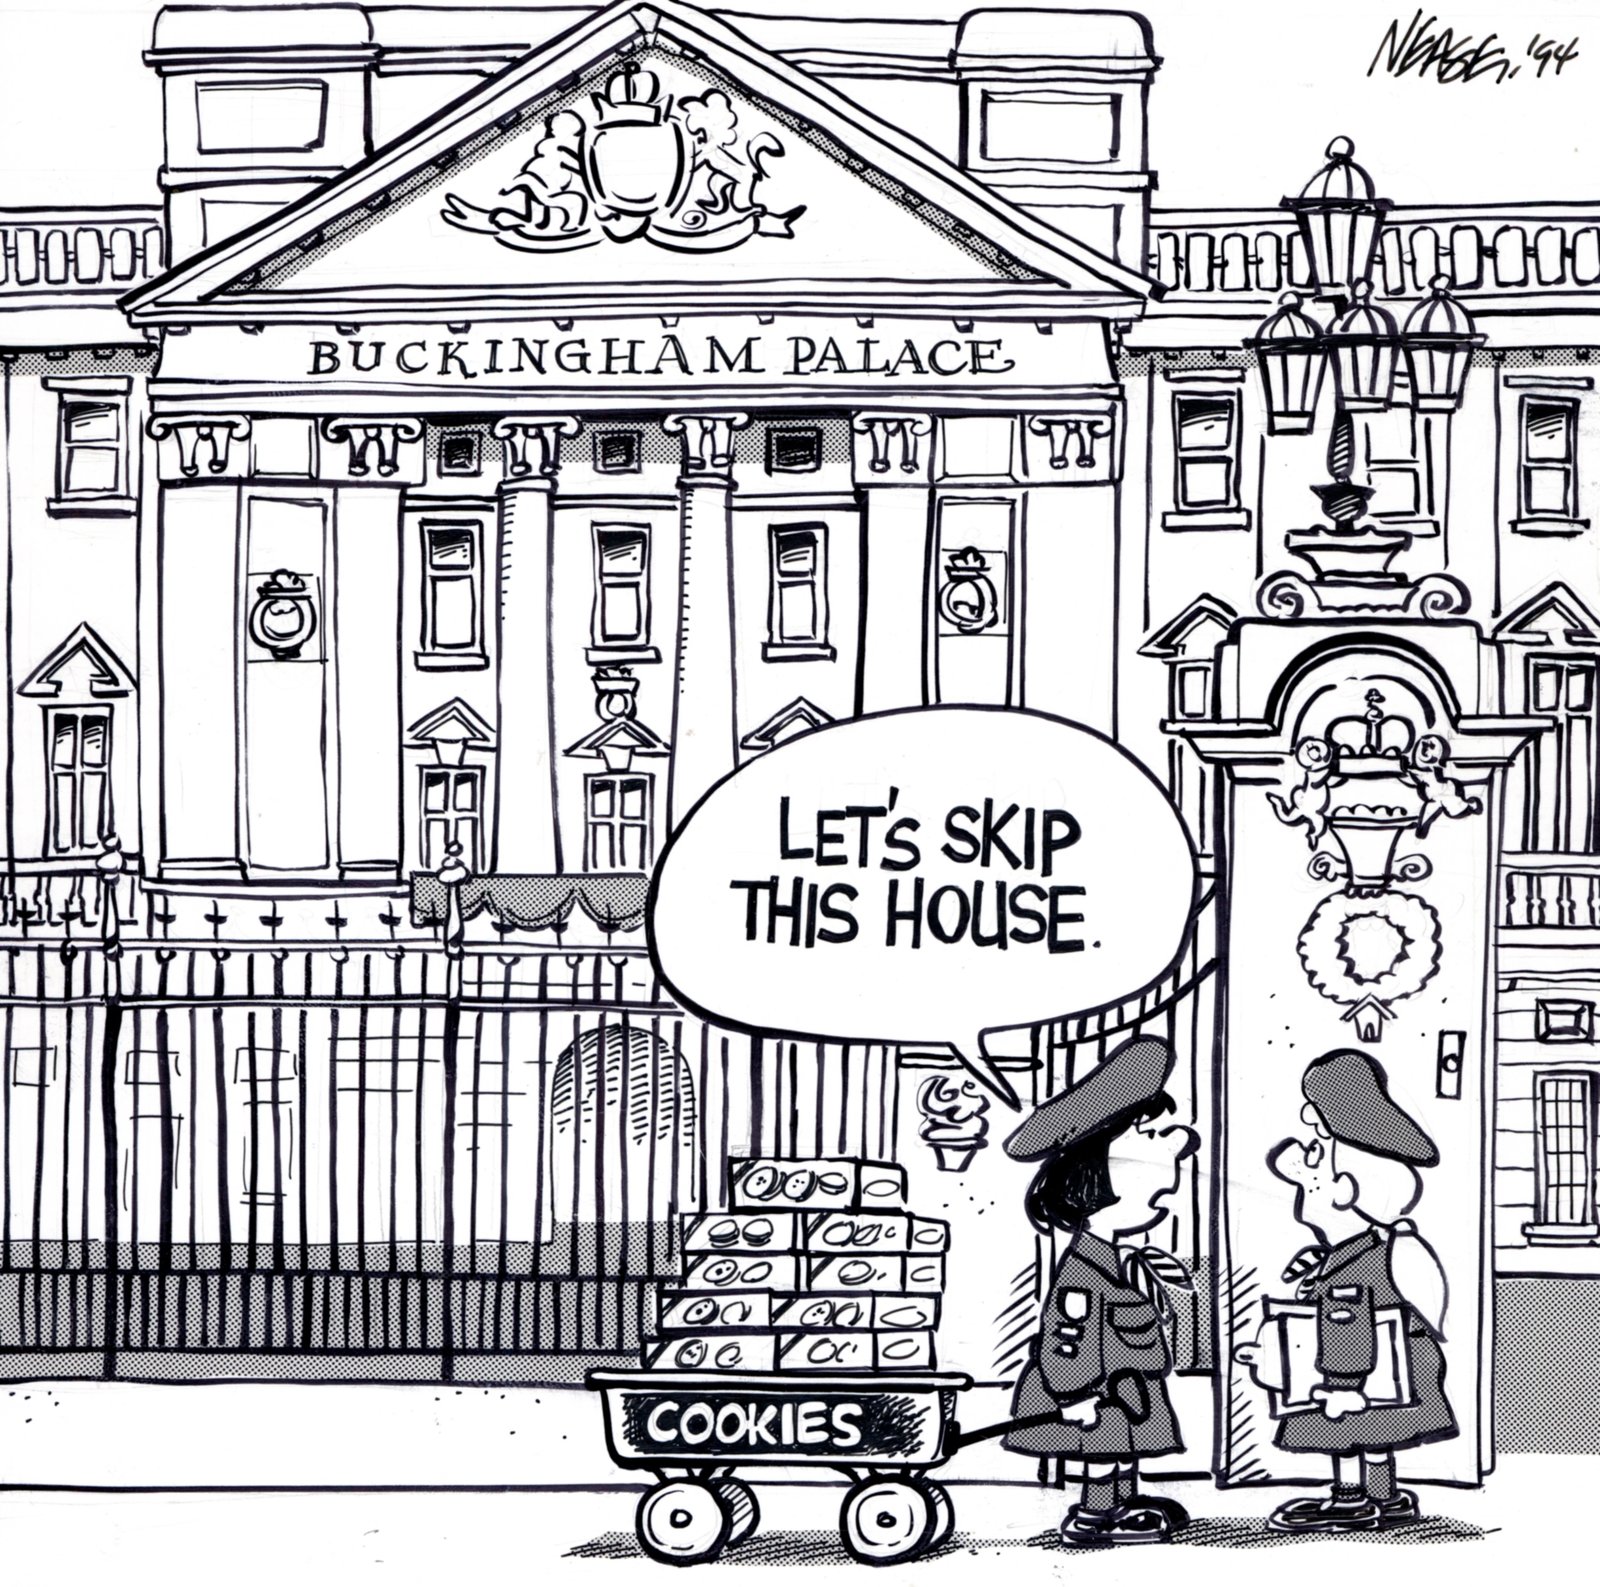 Buckingham Palace Cartoon Images : It is located in the heart of london